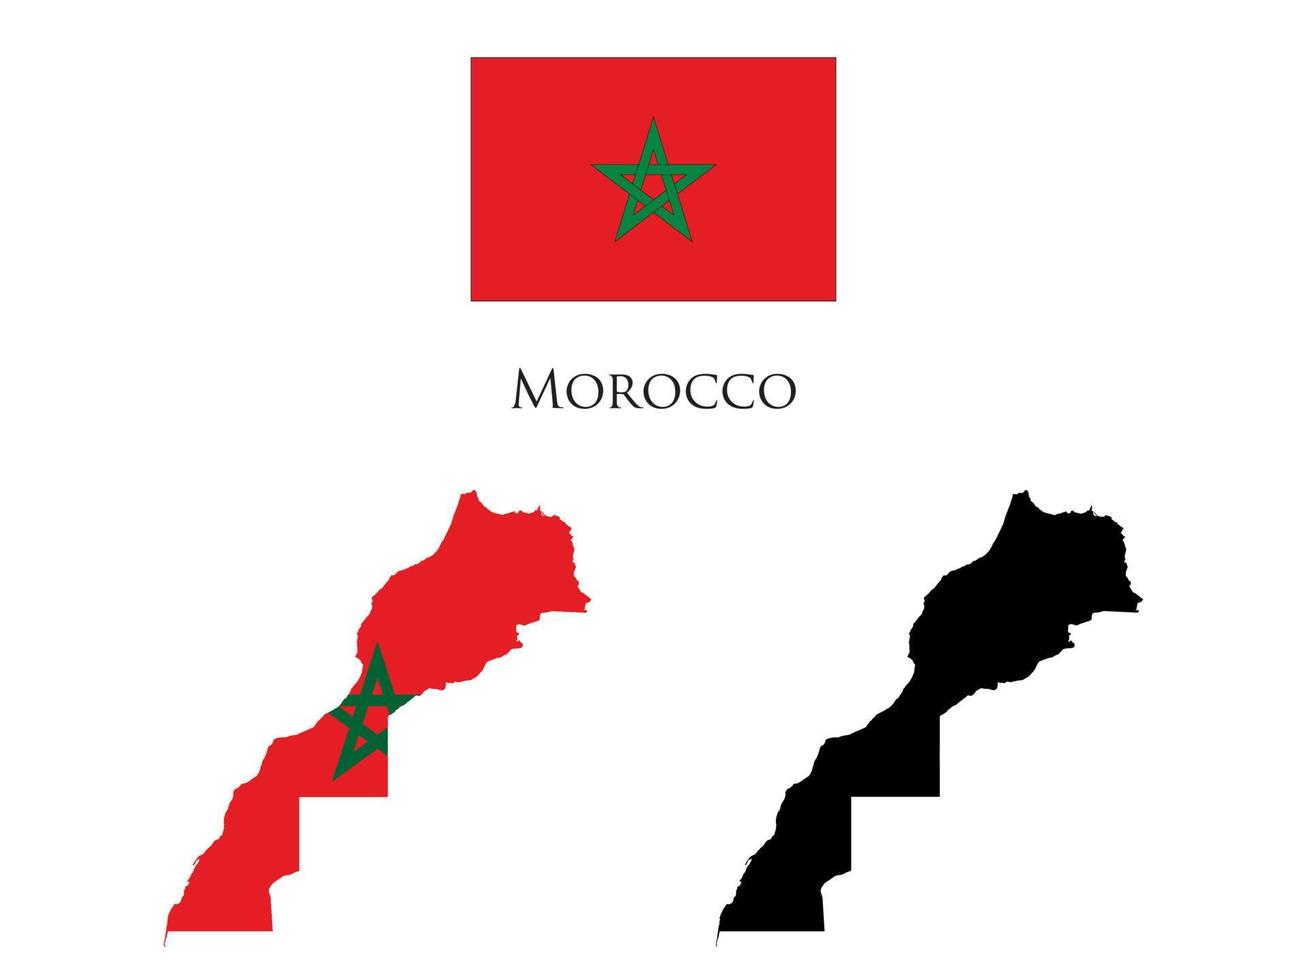 morocco flag and map vector